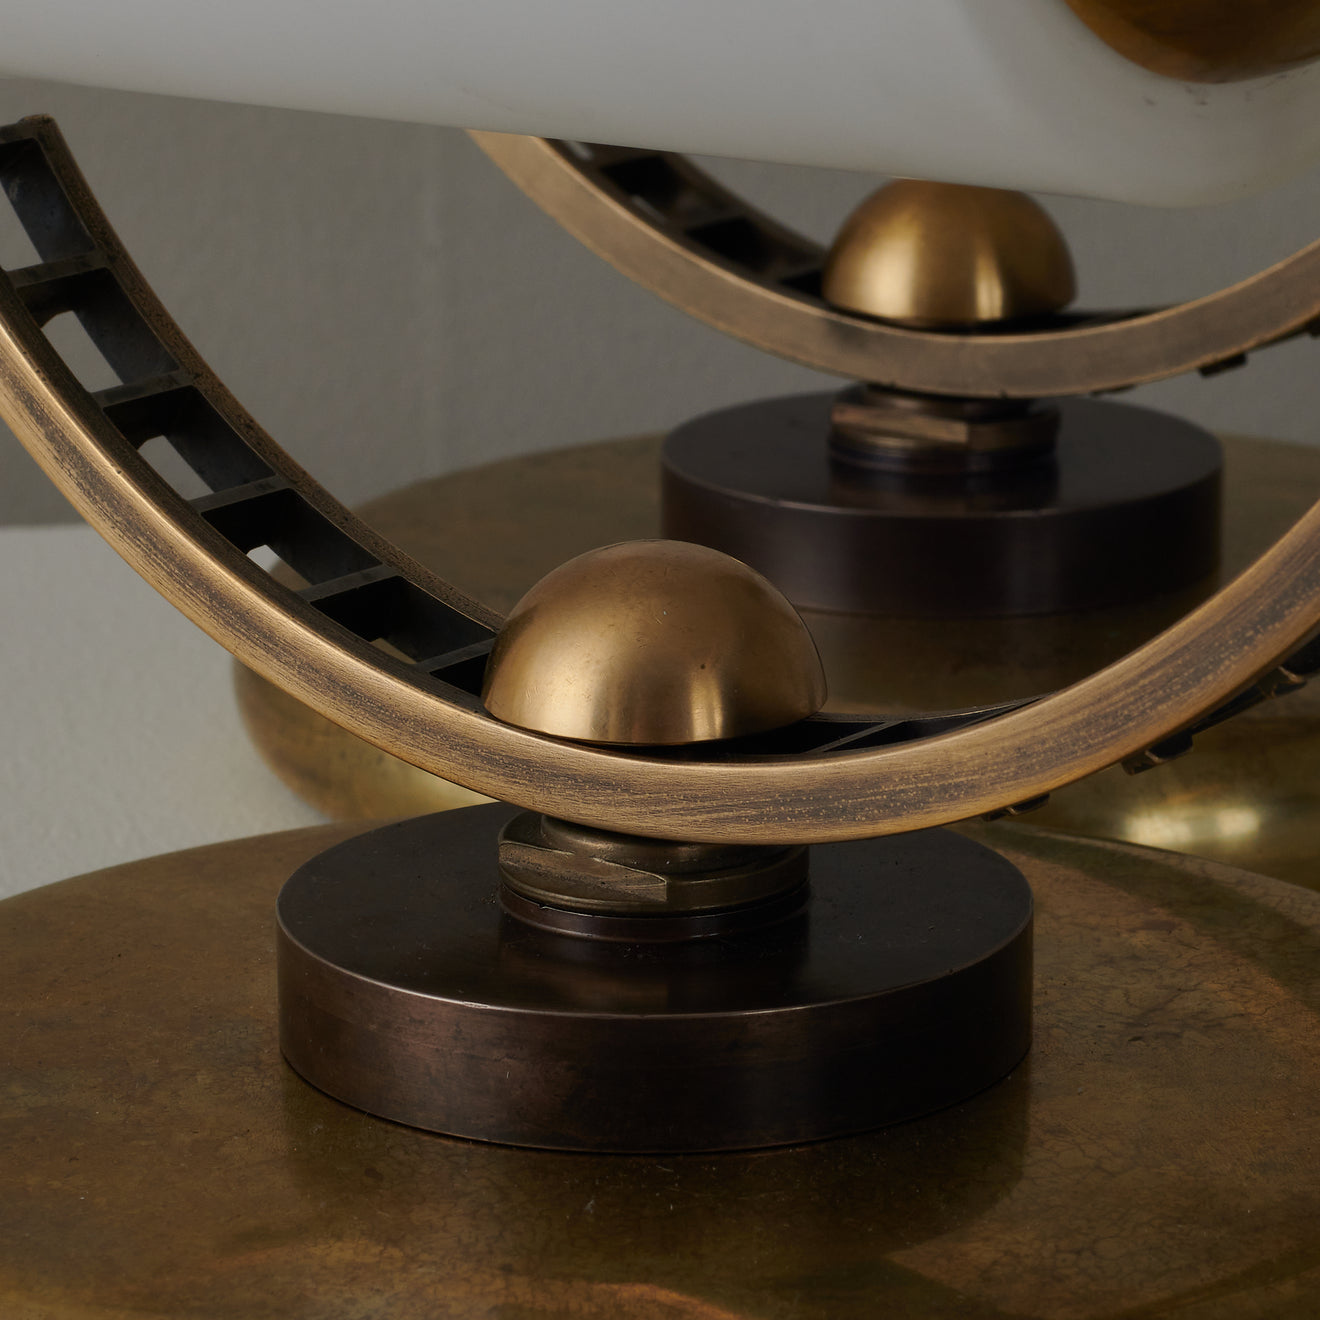 ’SYMBIOSIS’ PAIR OF TABLE LAMPS BY GIANNI VALLINO